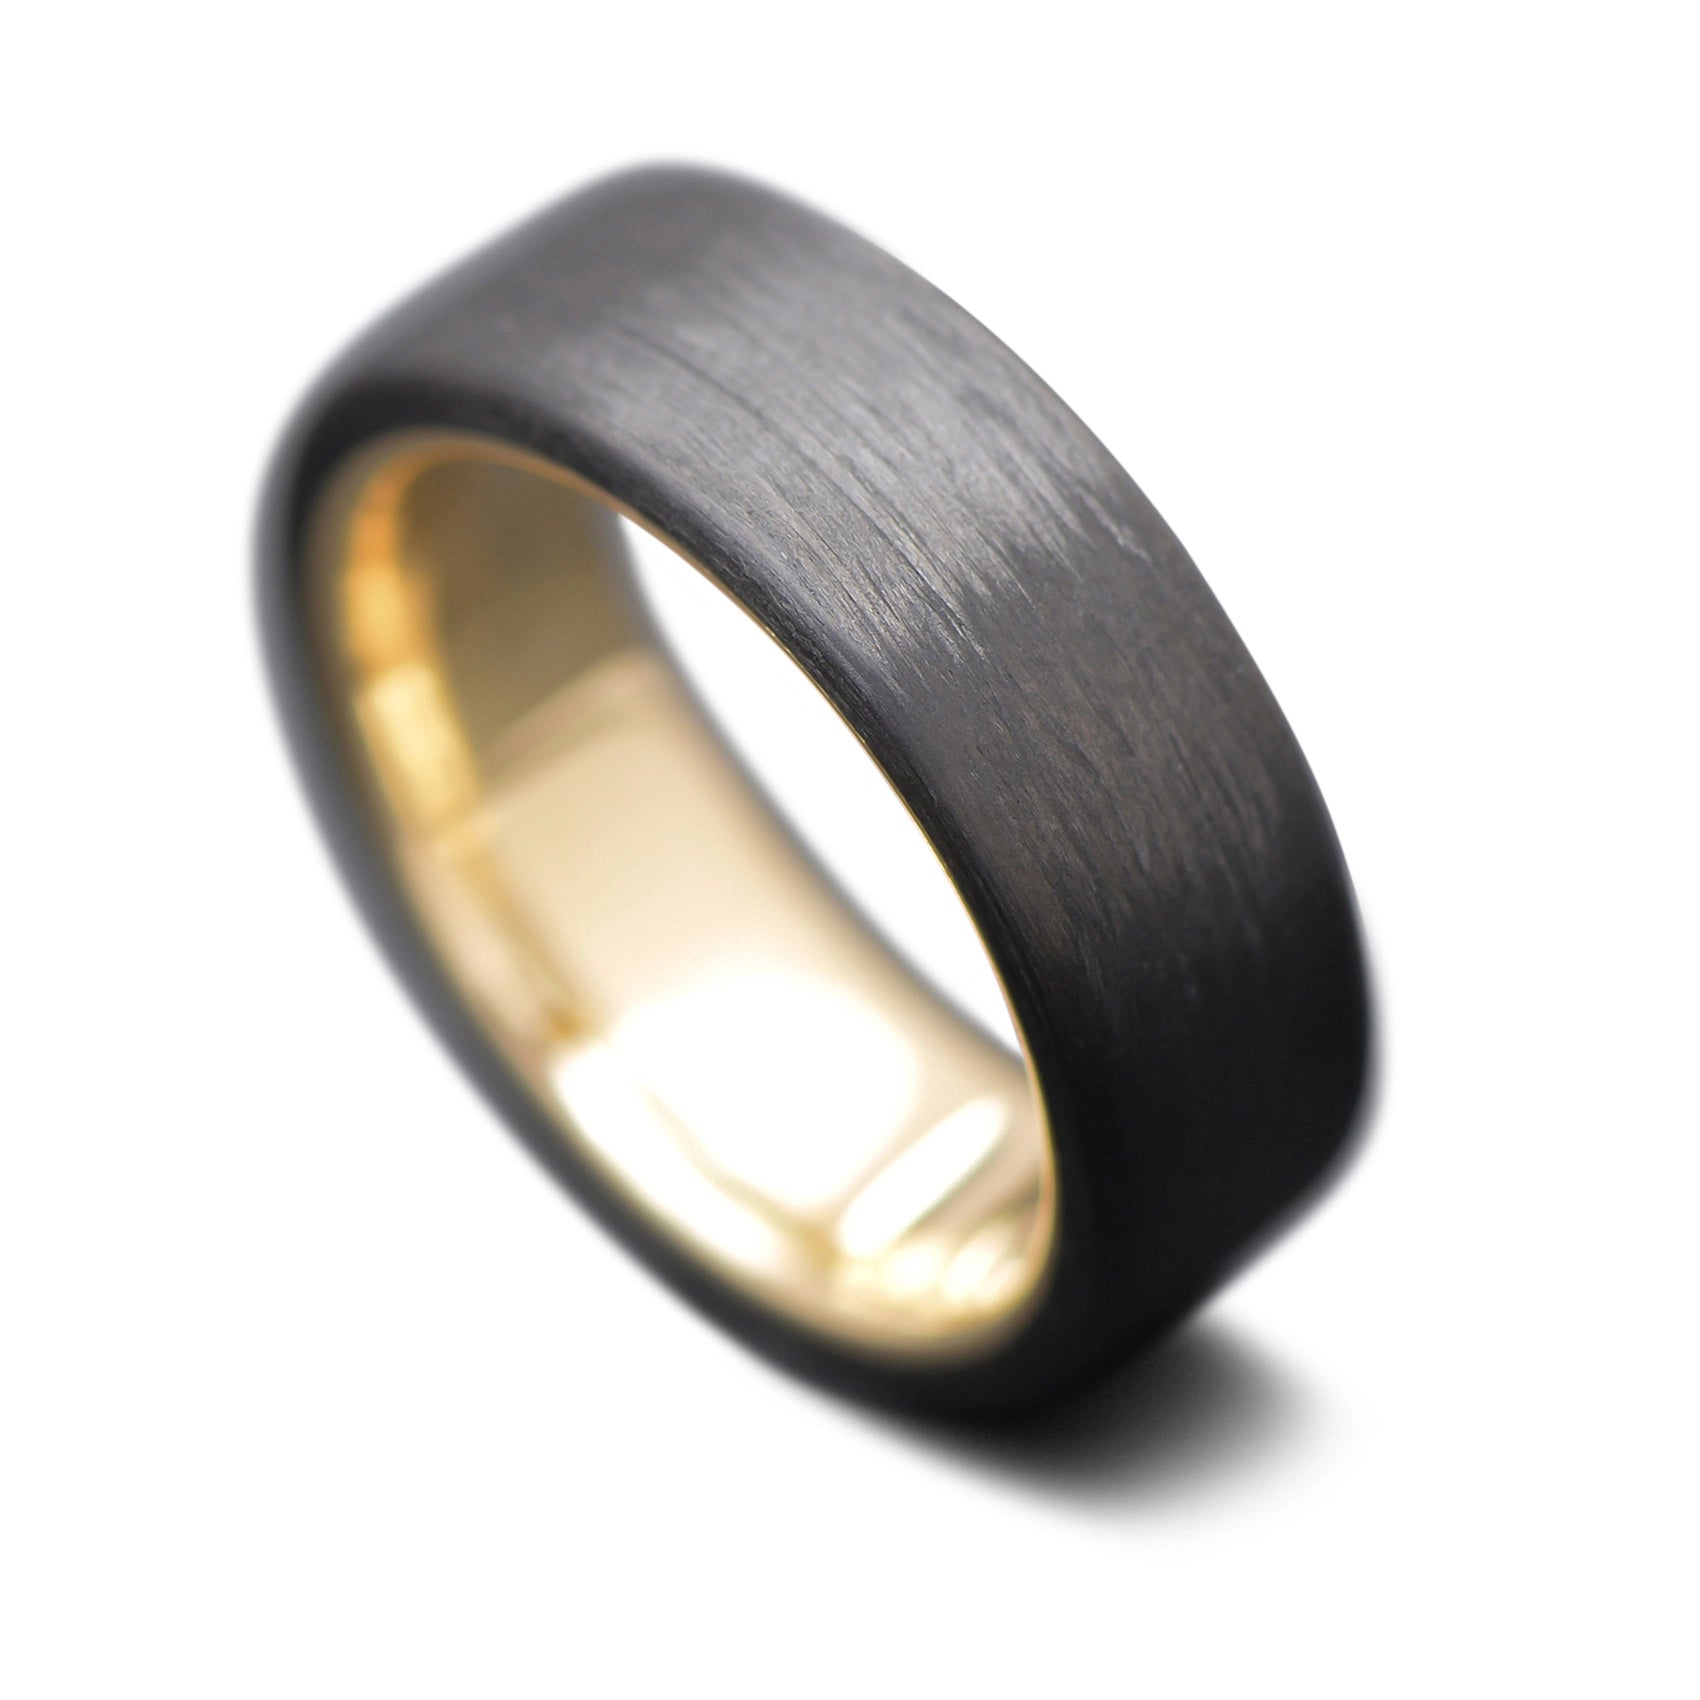 CarbonUni Core Ring with Yellow Gold inner sleeve, 7mm -THE QUANTUM